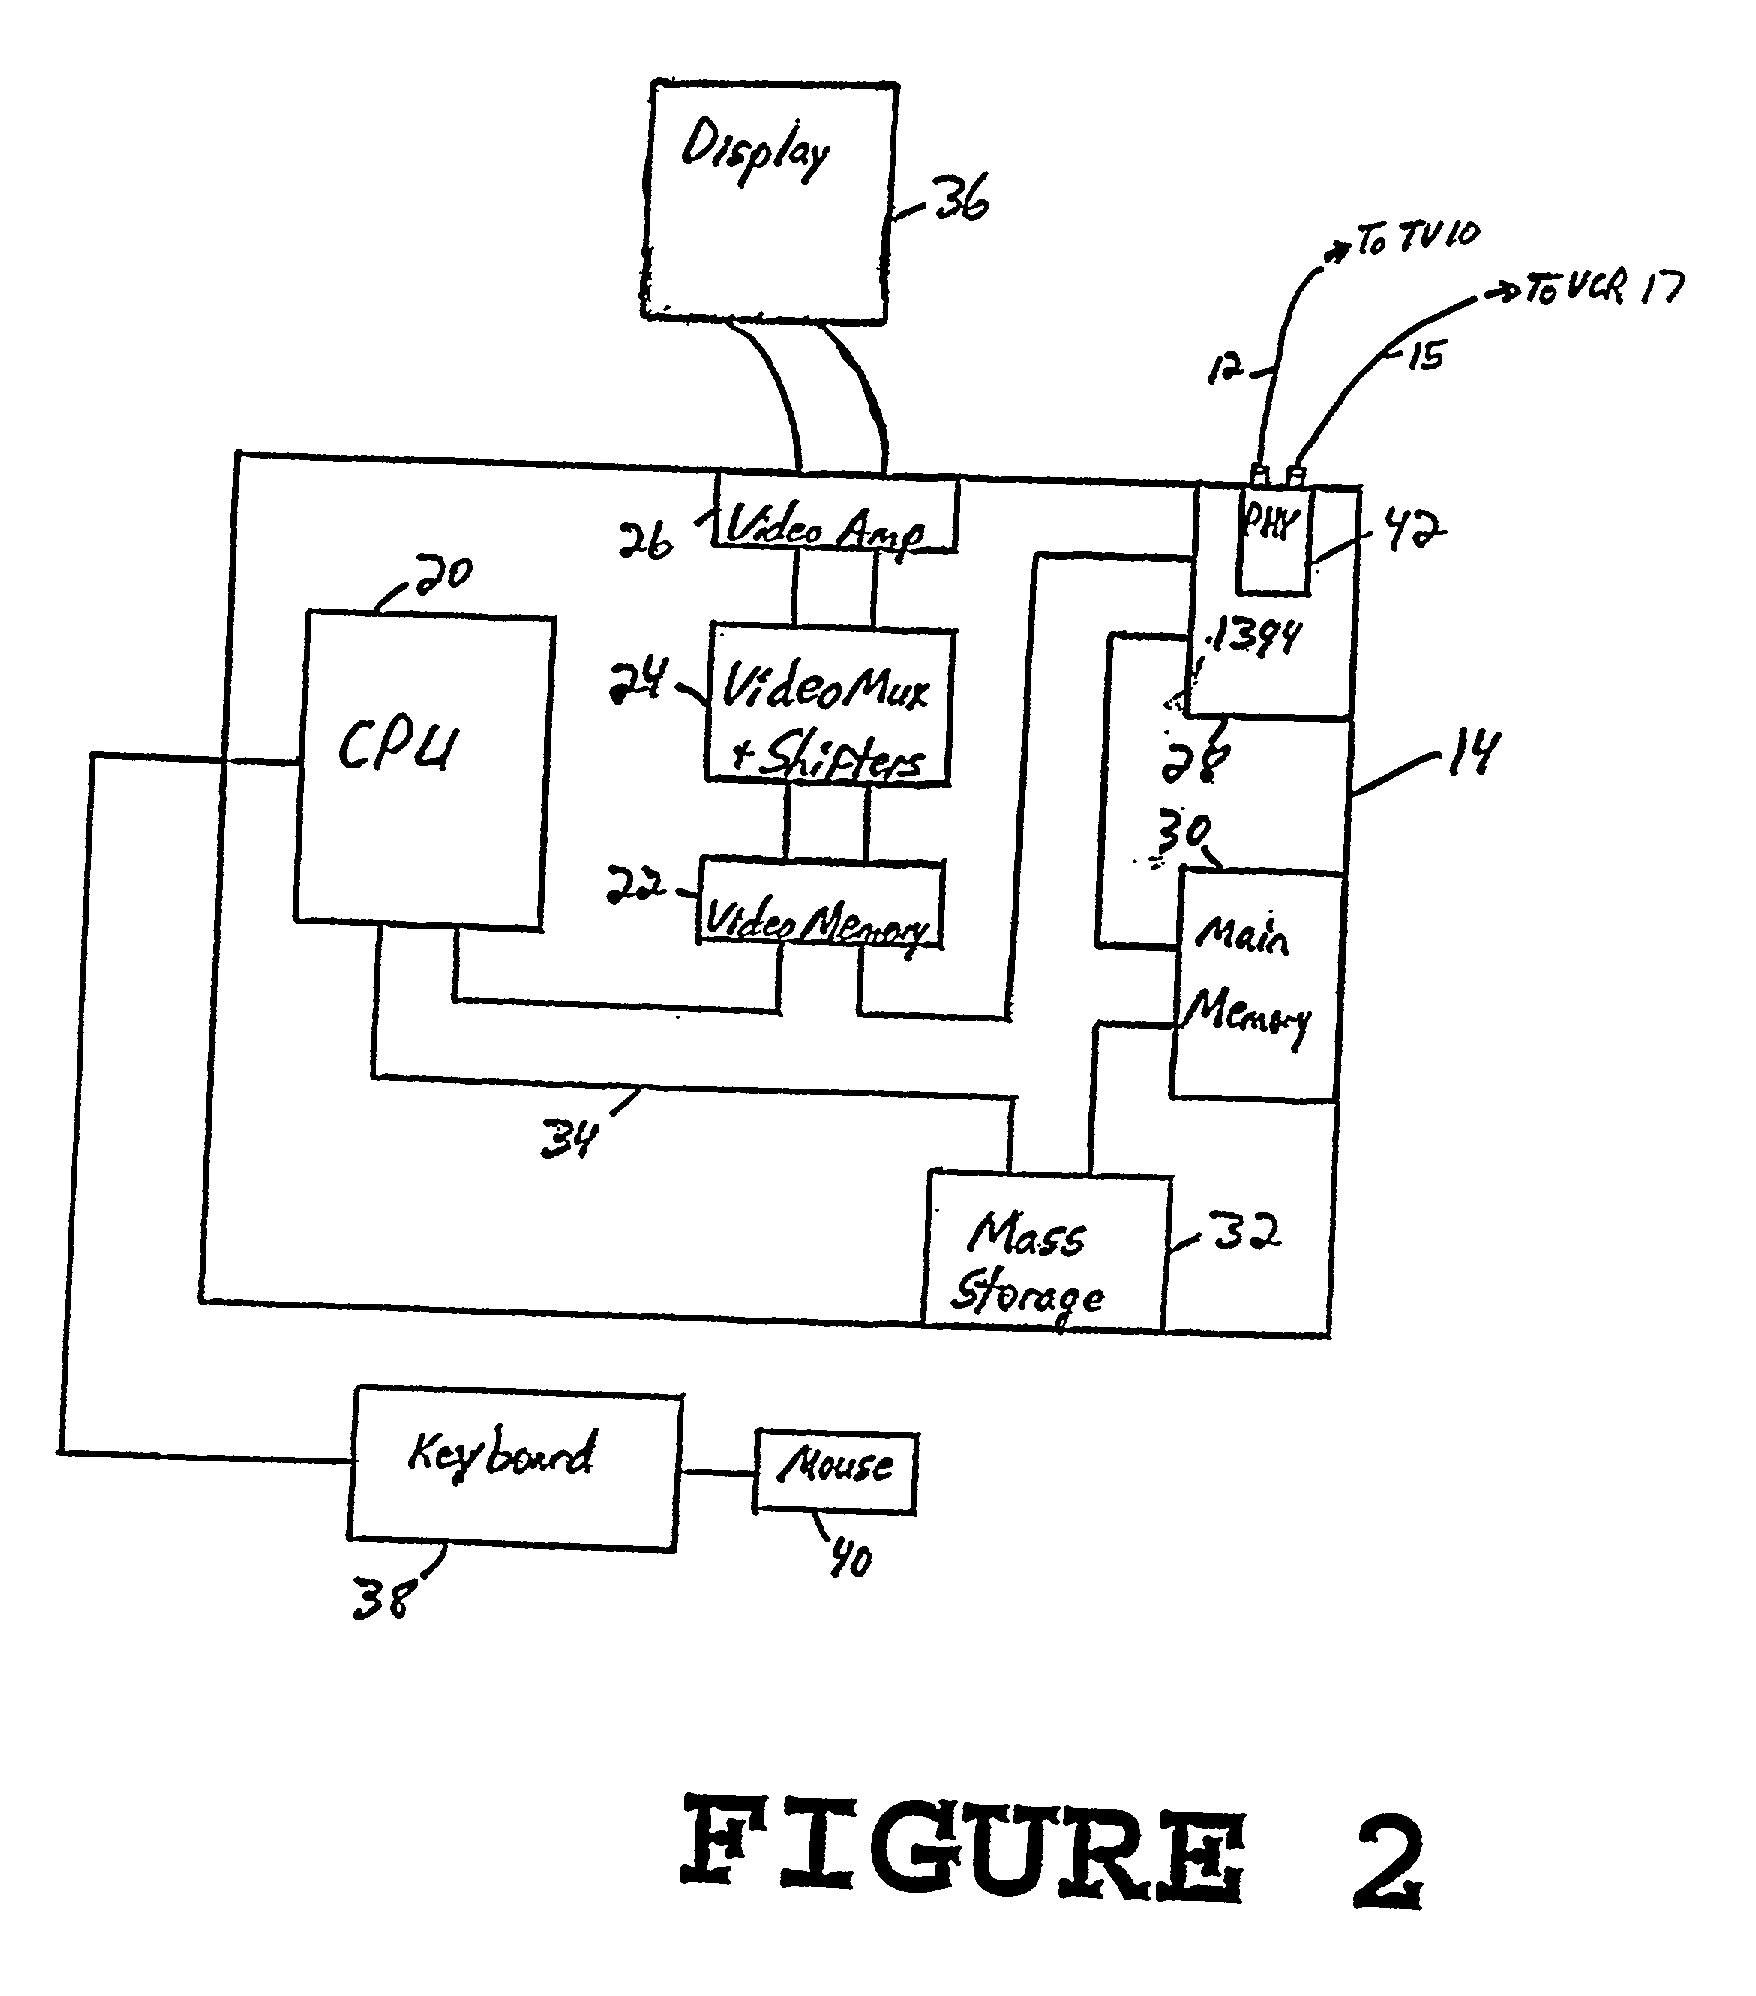 Video recording device including the ability to concurrently record and playback